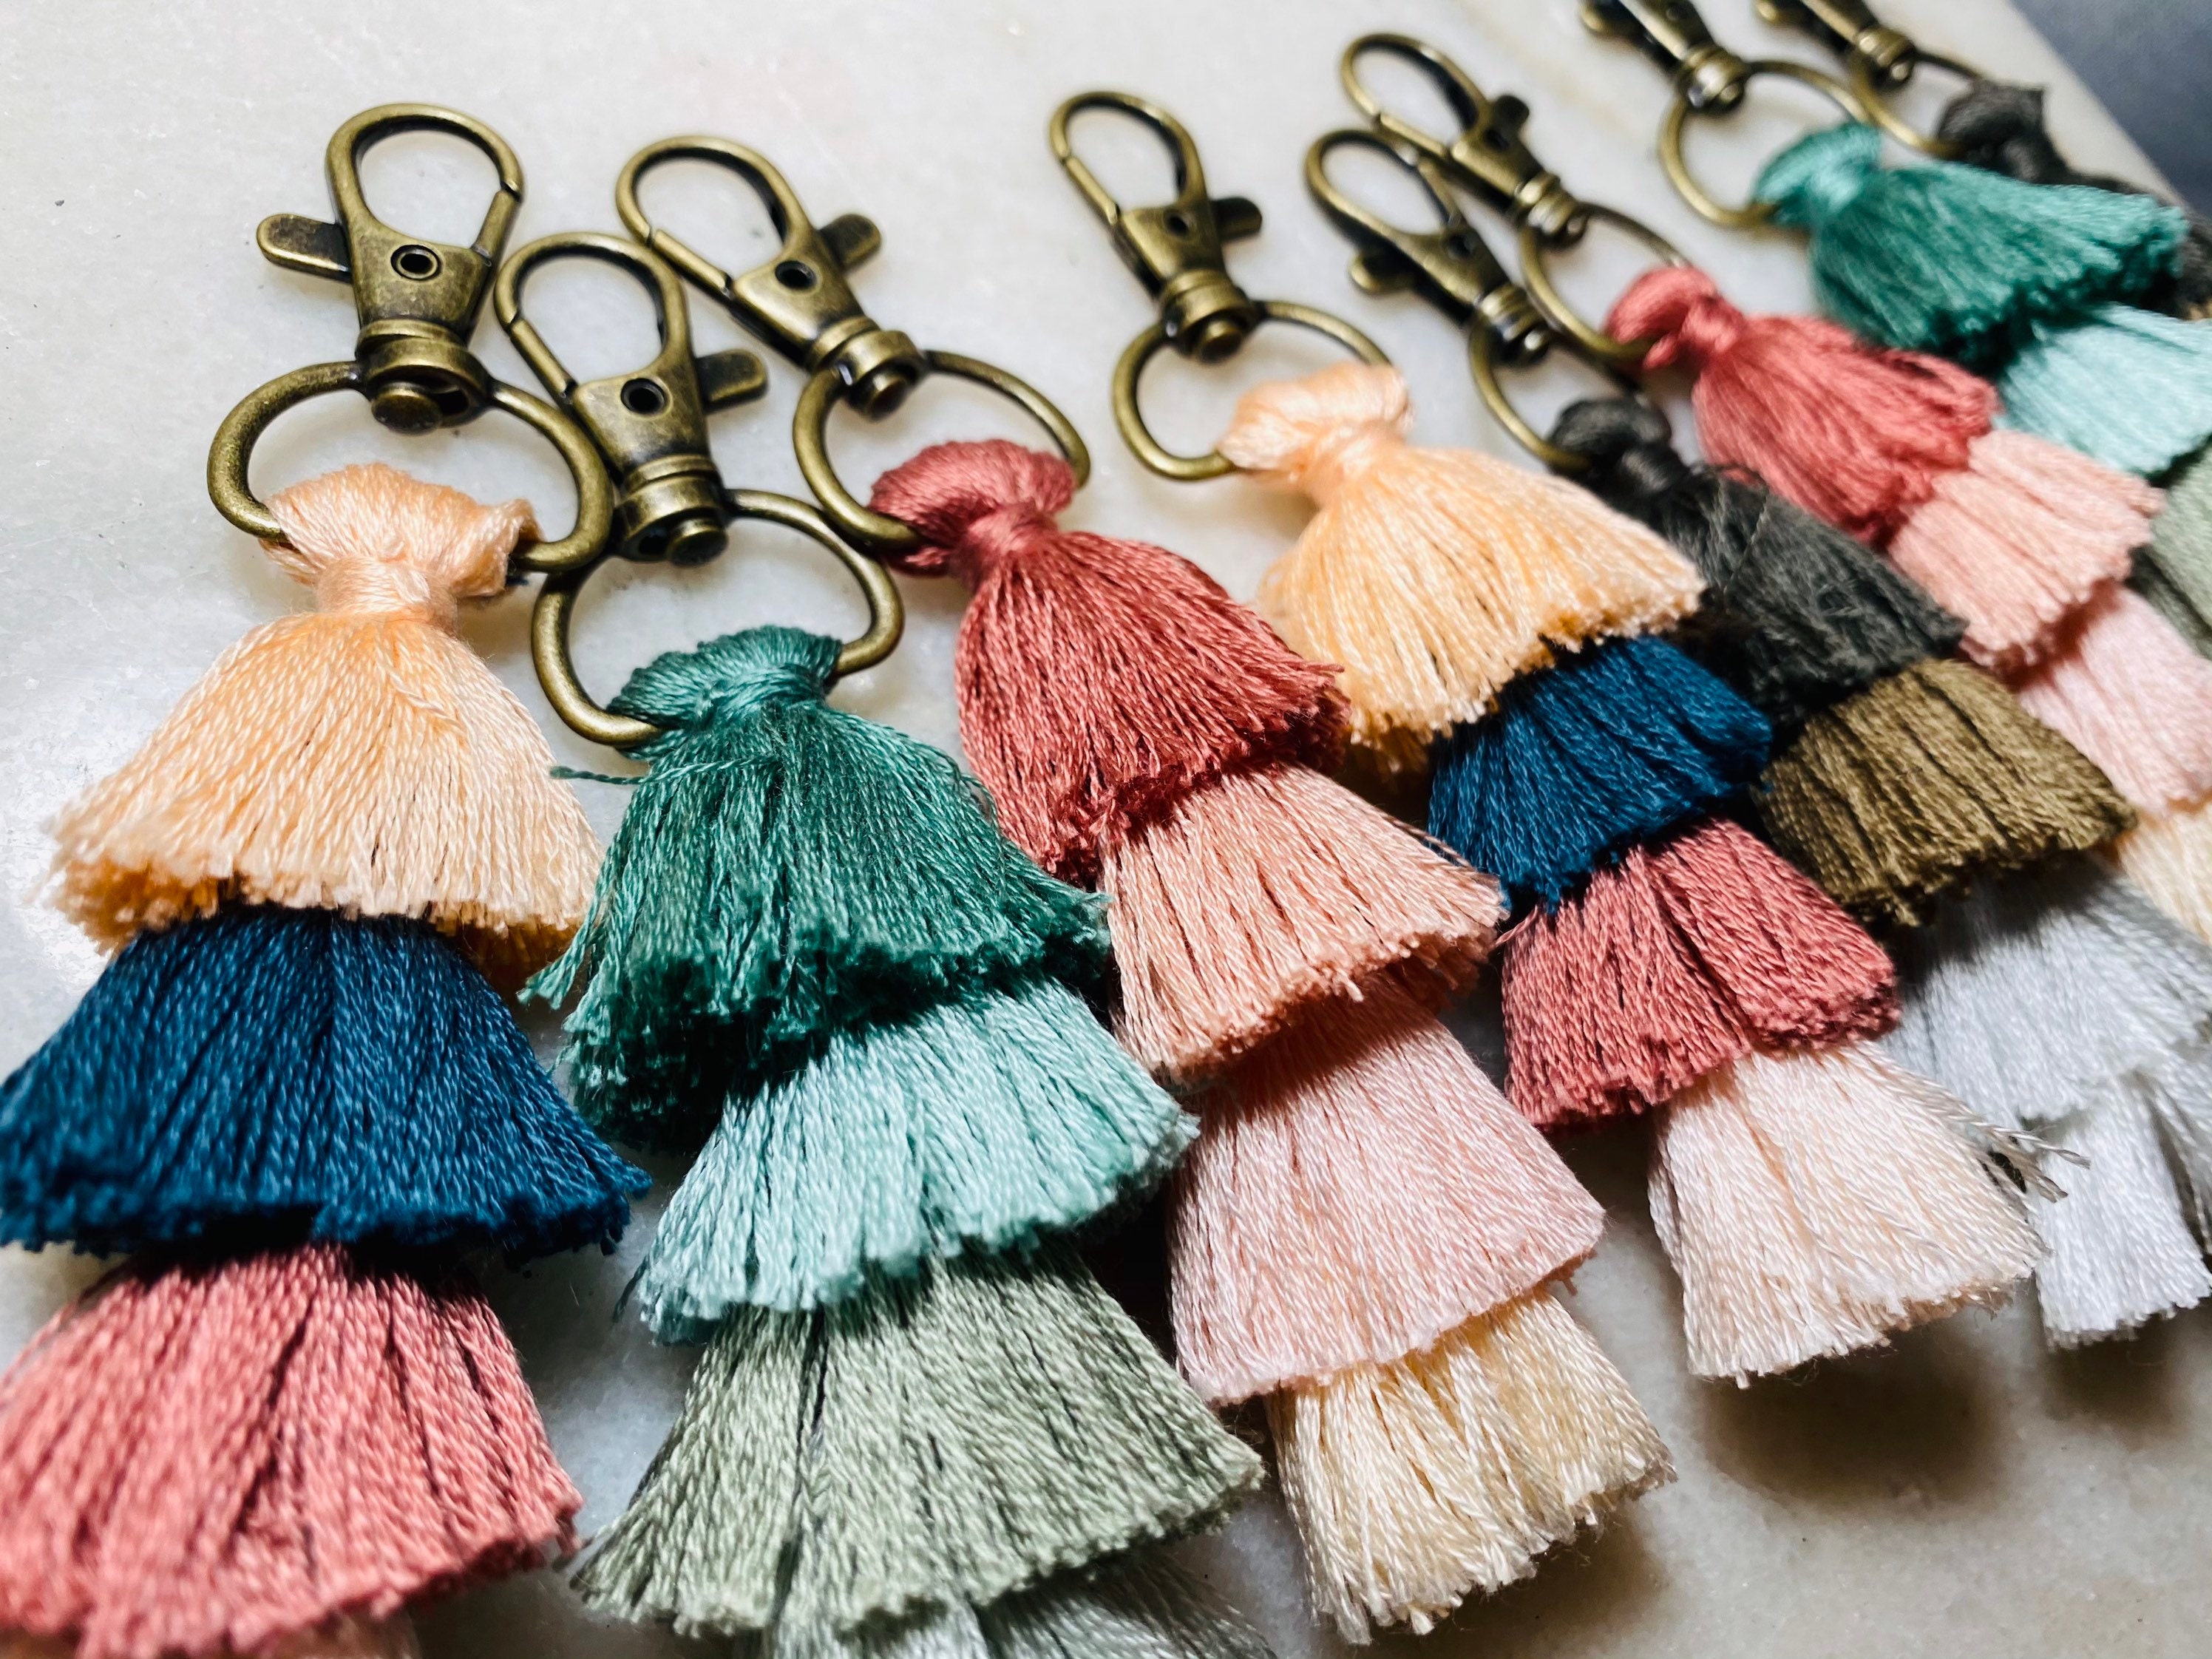  50 Pcs Keychain Tassel with Silver Cap 3.5 inches Faux Leather  Tassel Suede Tassels Pendants with Loop for Cellphone Crafts Strap Jewelry  Making DIY Earring Necklace Decoration (Navy Blue)